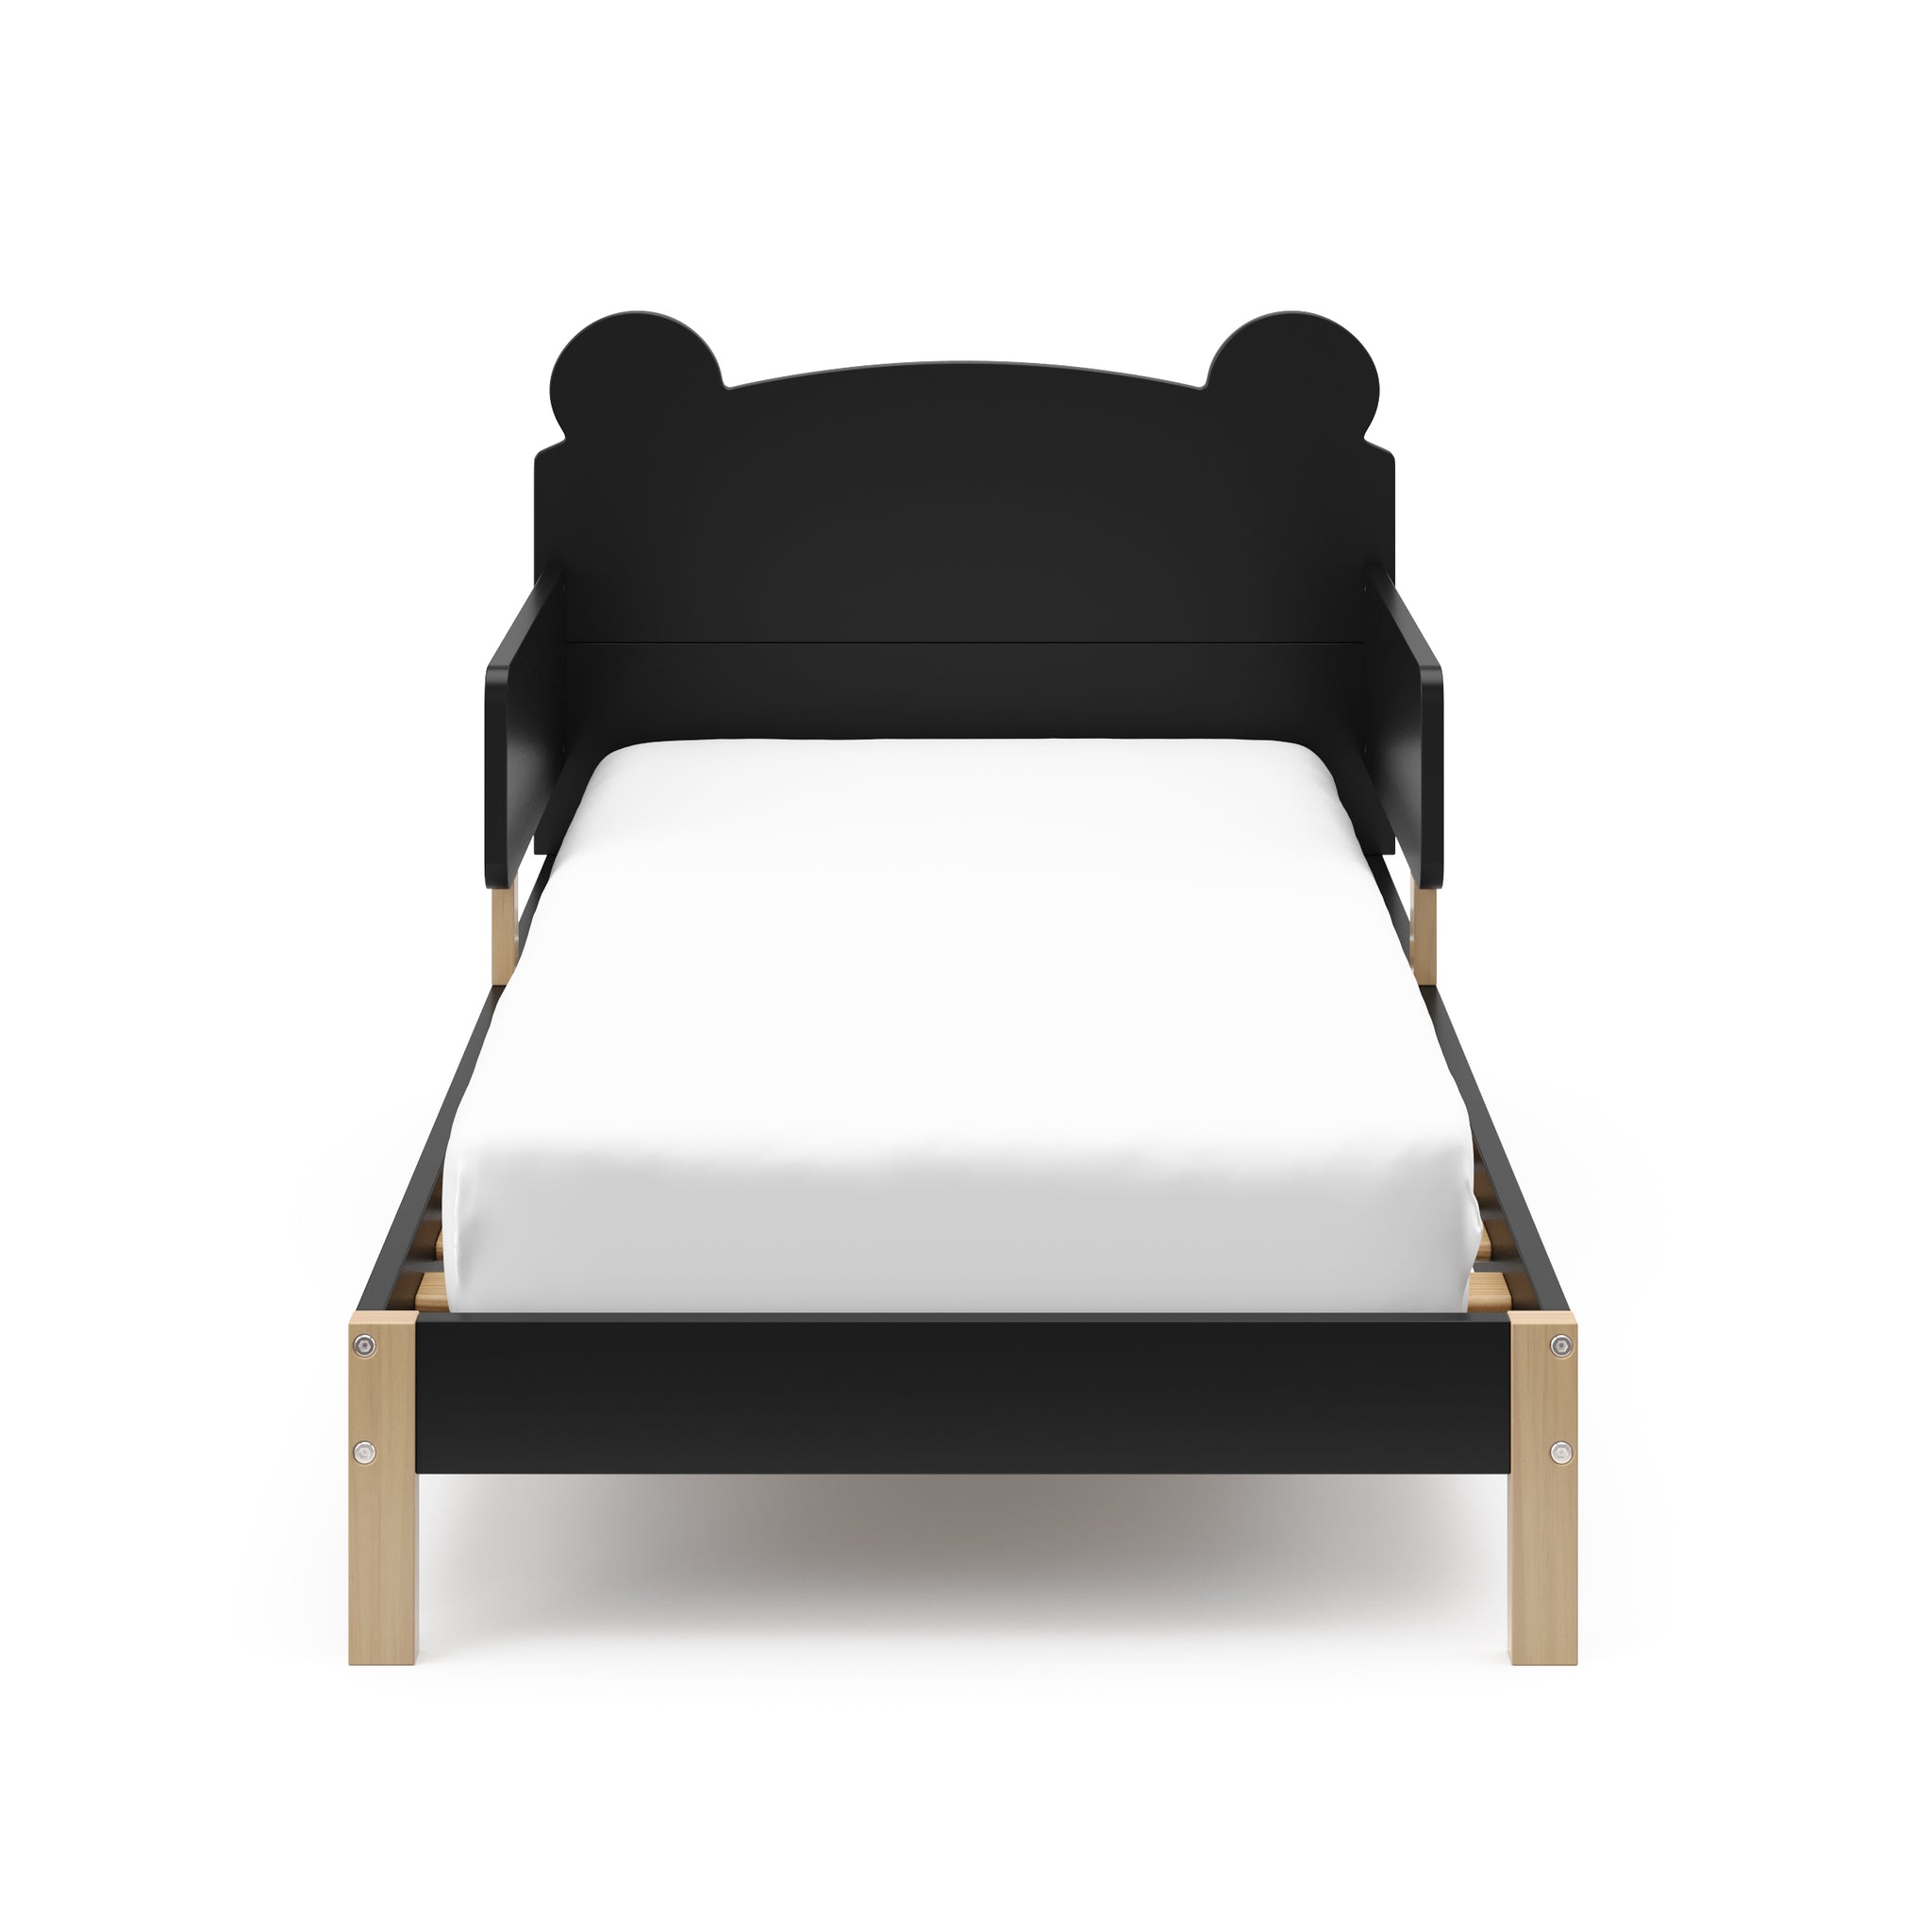 Front view of a black-colored toddler bed with teddy bear ears shape